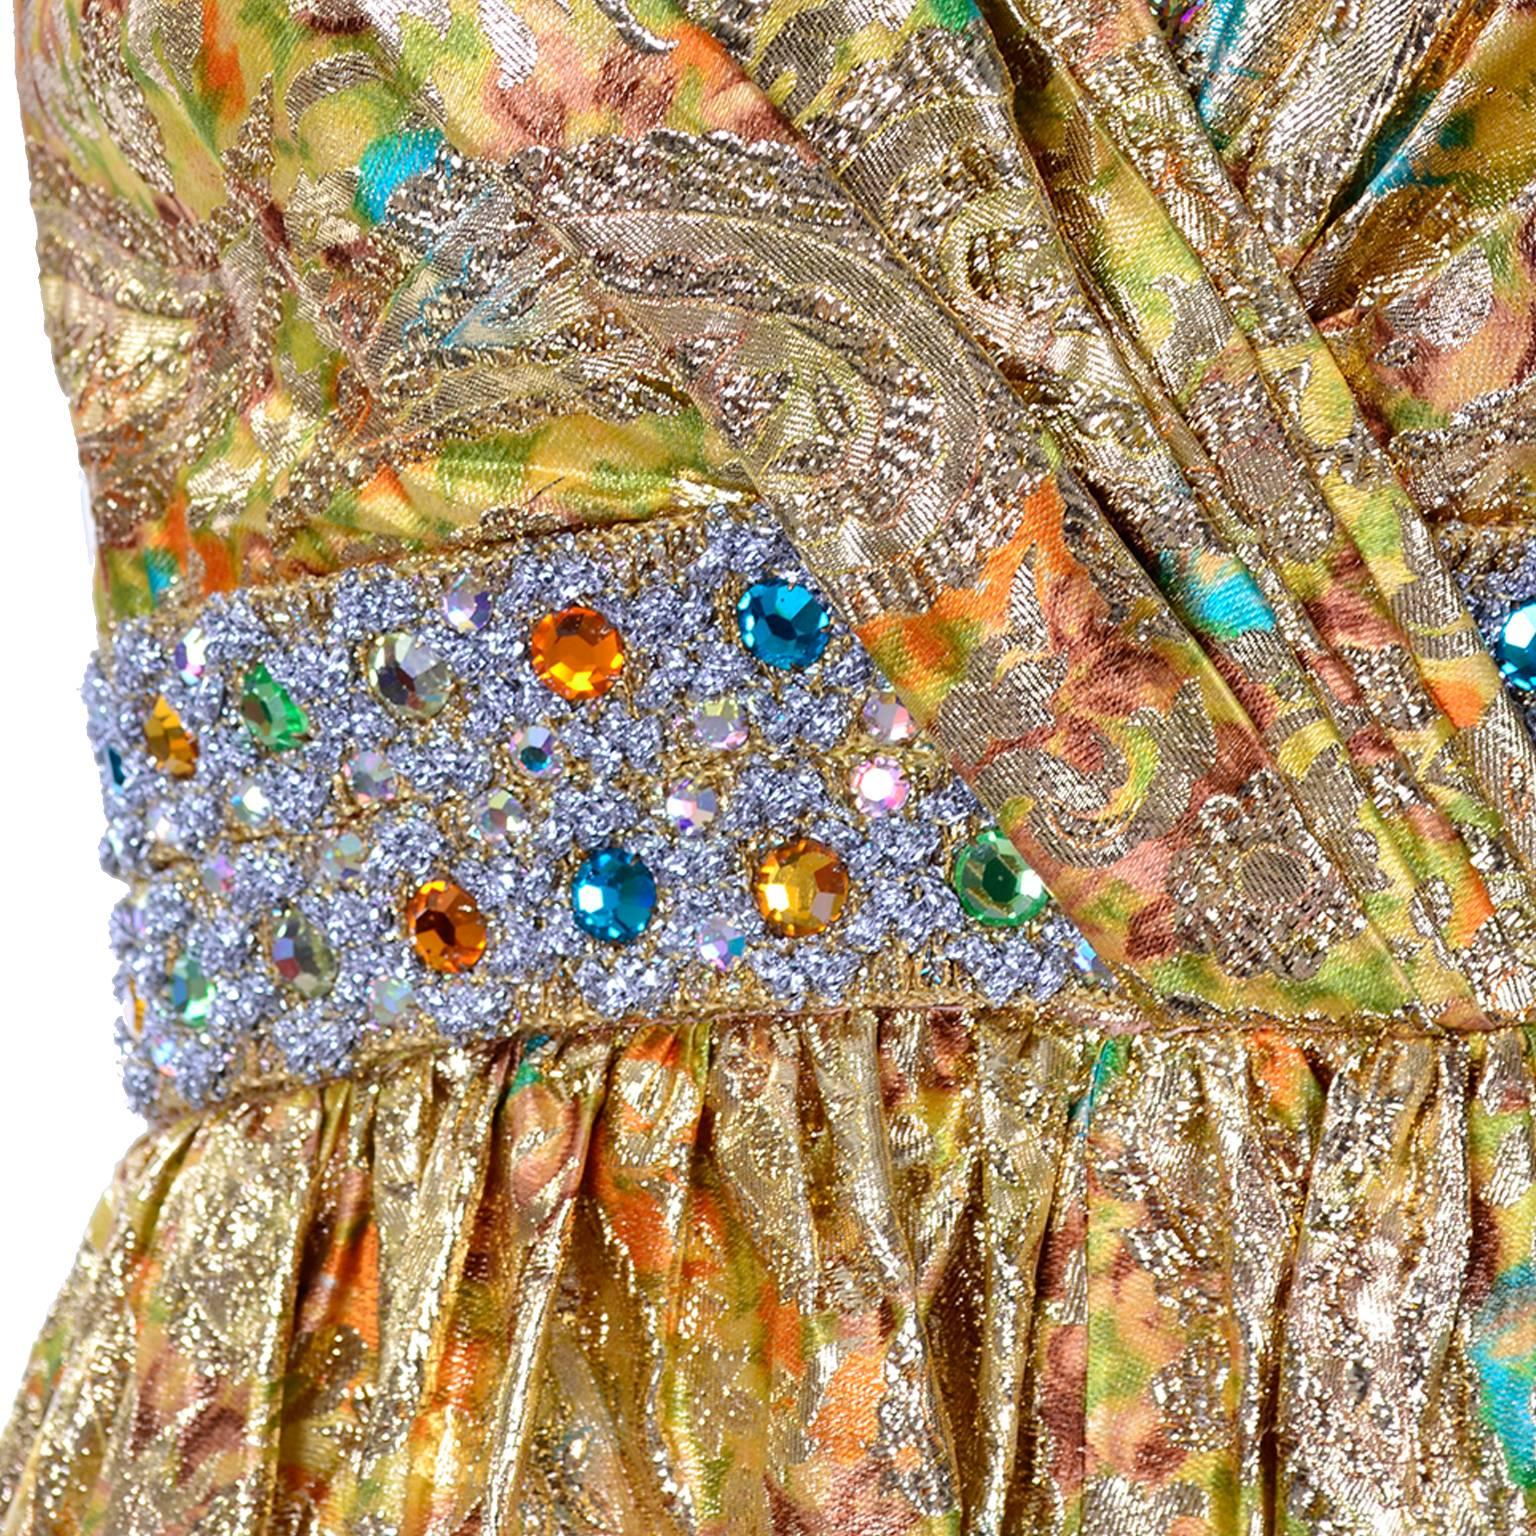 THE BEST JUMPSUIT EVER! A sensational 1960's goddess metallic jumpsuit in a yellow, green, blue and orange print with giant gold embroidered paisley design. There is a gelt of glittering rhinestones and gemstones in the same colors as the rest of